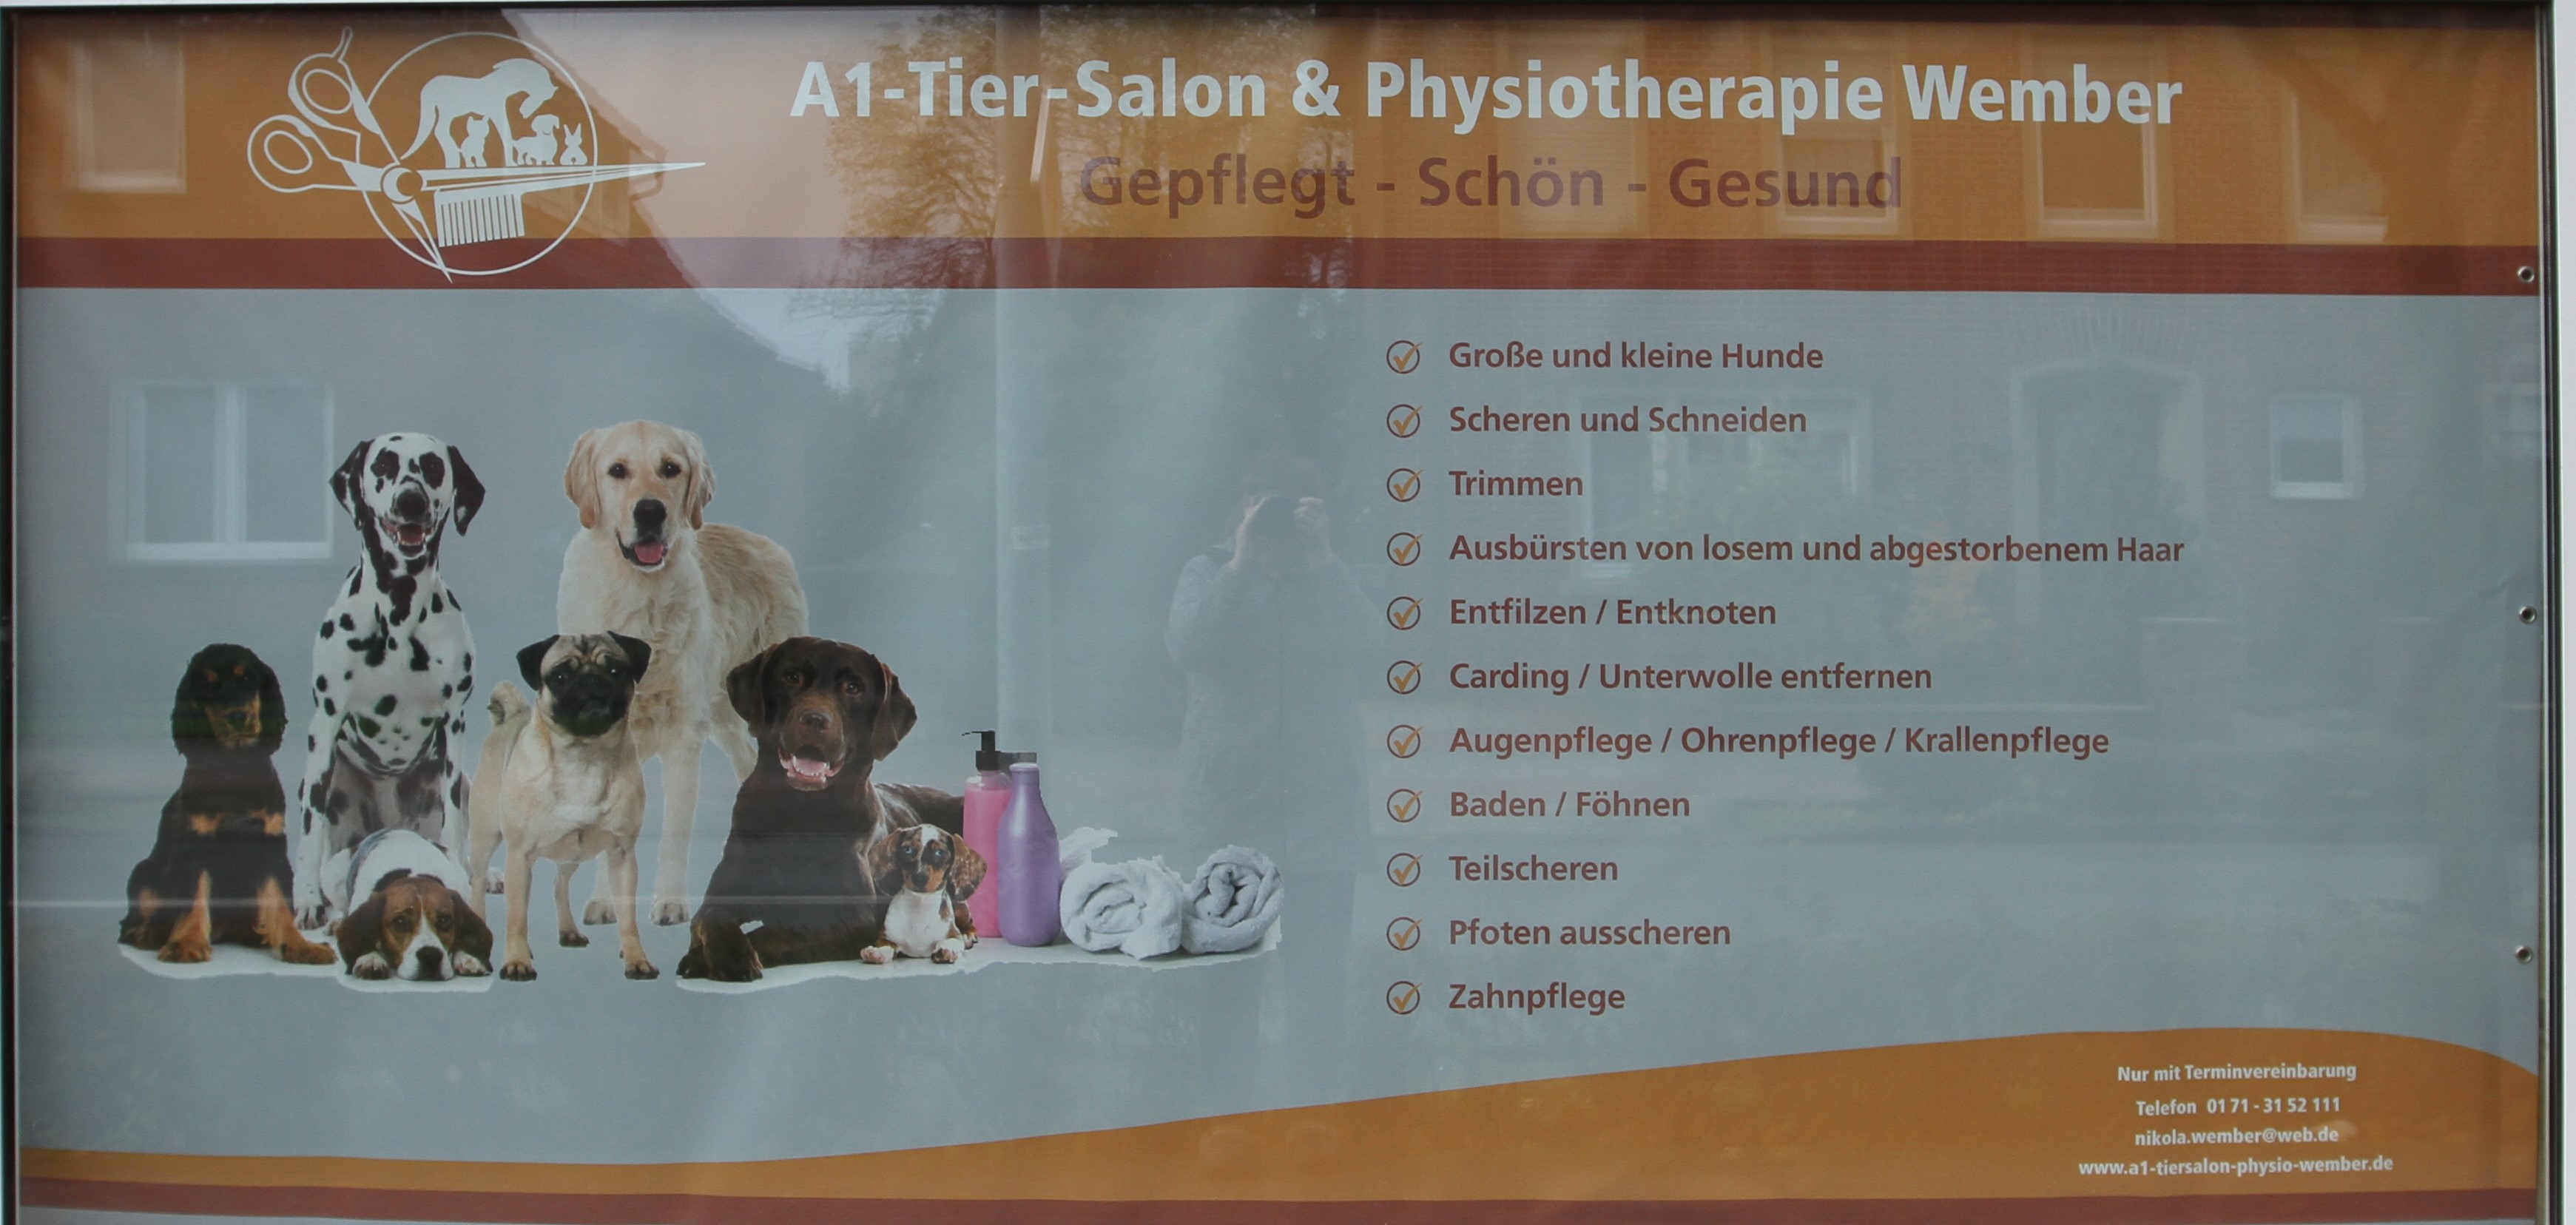 A1 Tier-Salon & Physiotherapie Wember